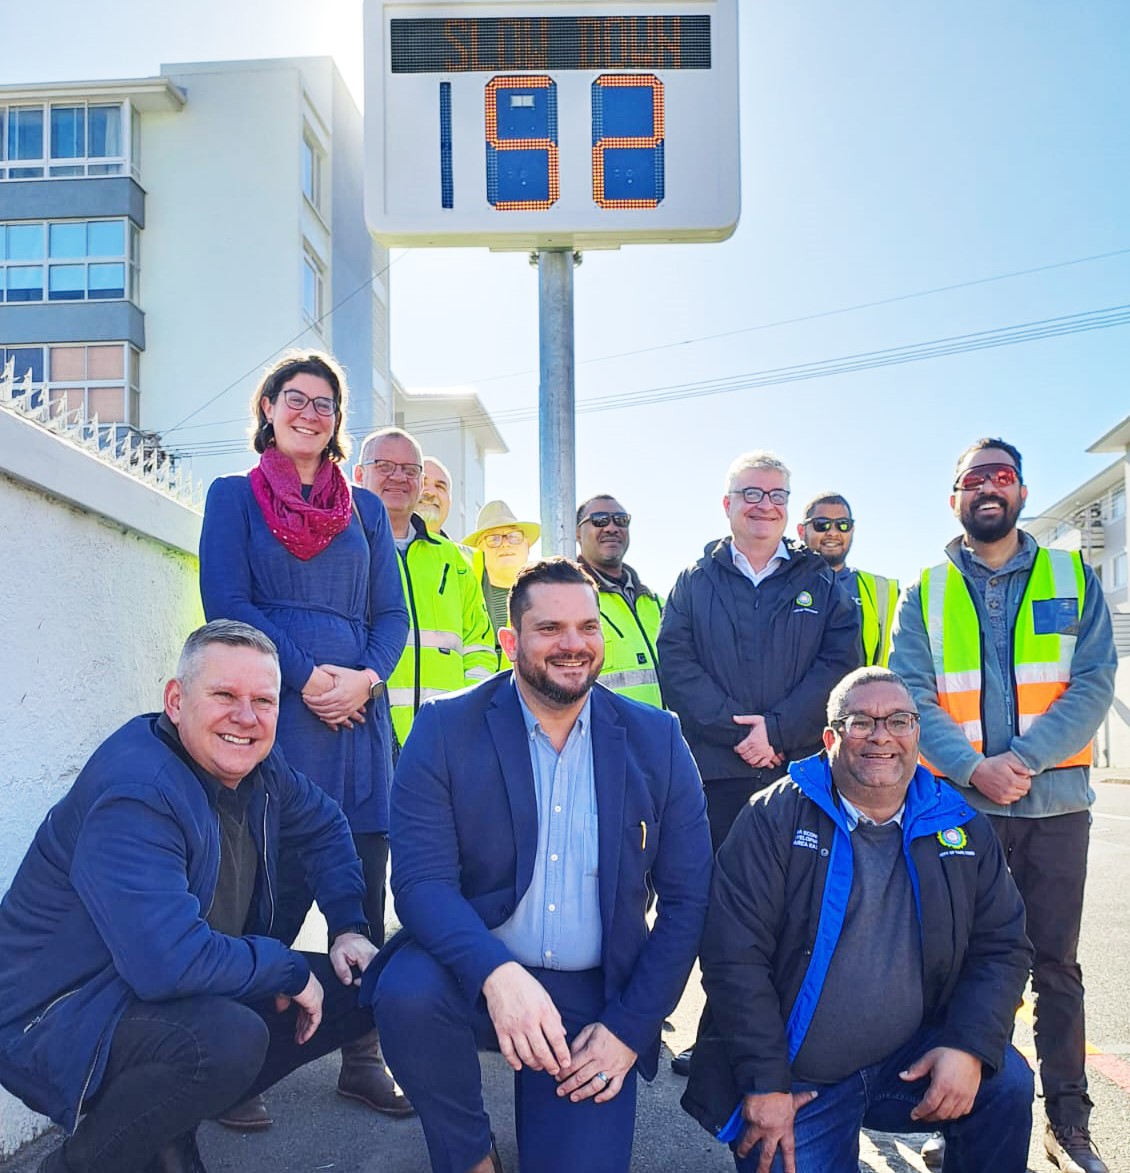 cape town, smart speed signs, cape town’s “smart speed signs” a big success – here’s how they work